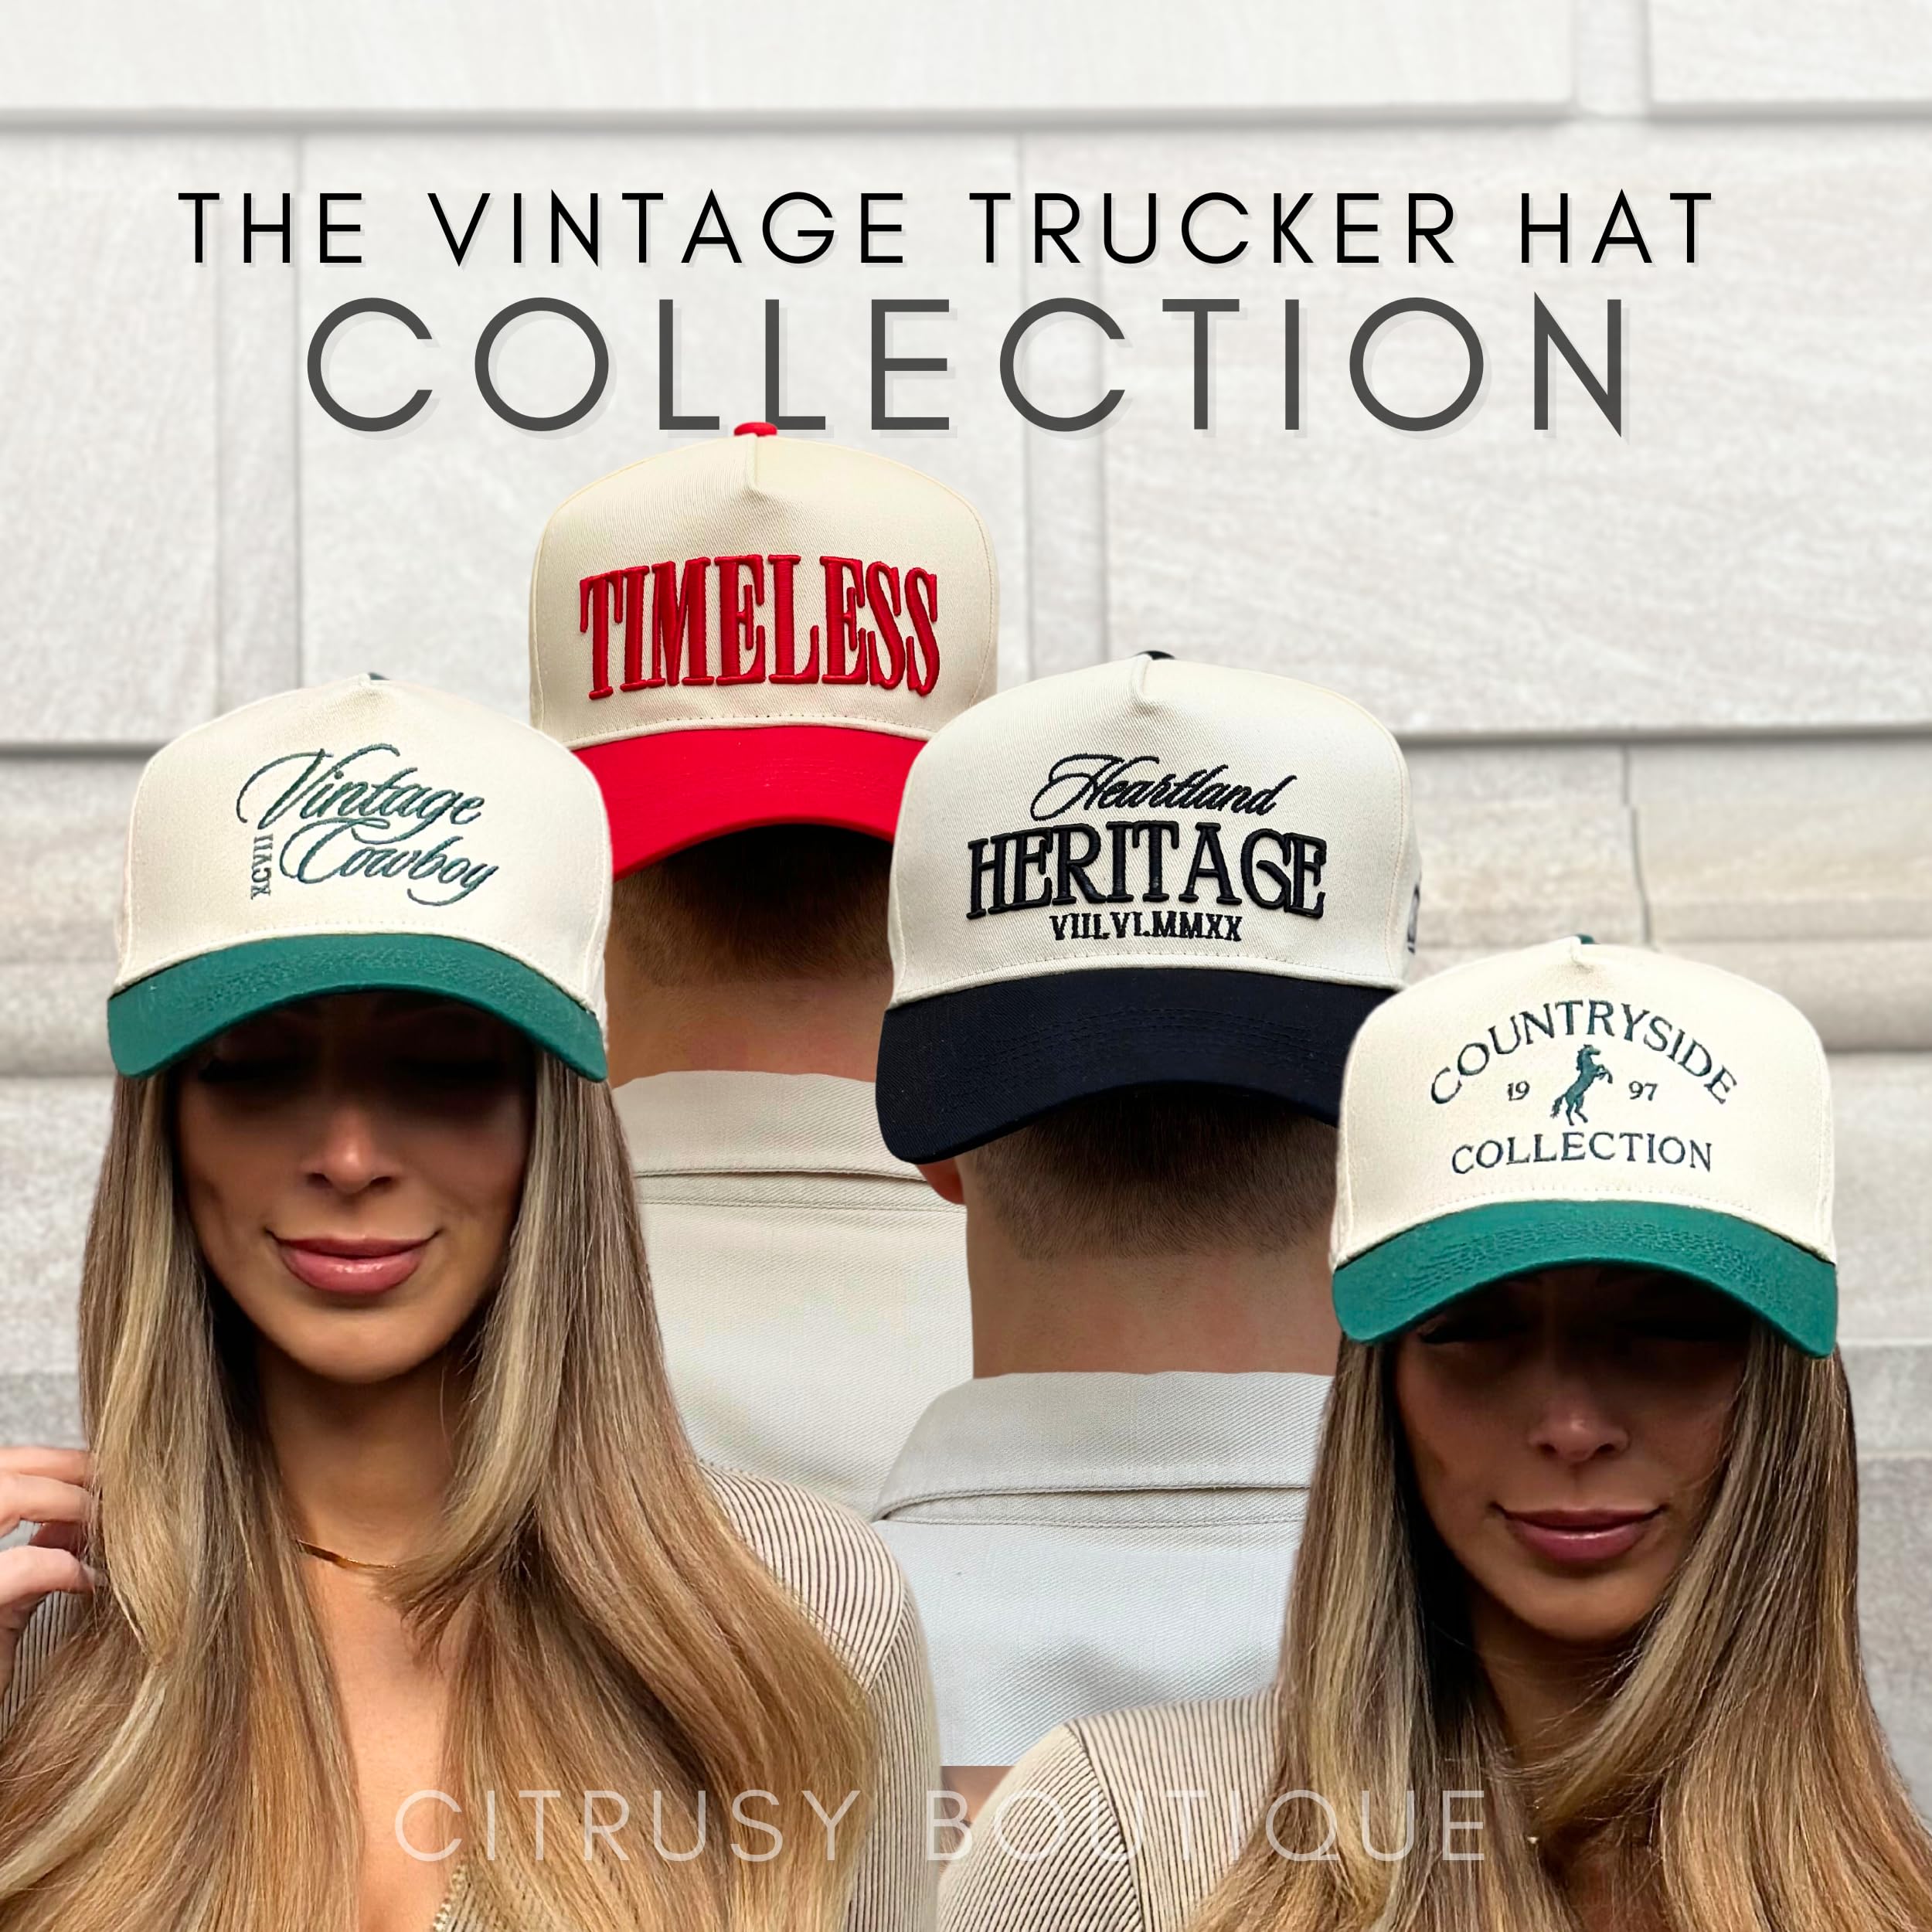 Vintage Trucker Hat | Country Cowboy Cute Preppy Retro Western Trucker Hats | Men Women Trendy Baseball Snapback | Two Tone Tan Red Green Black Trucker Hat | Cotton Embroidered Cap (Timeless | Red) - Caps Fitted Caps Fitted Citrusy Boutique